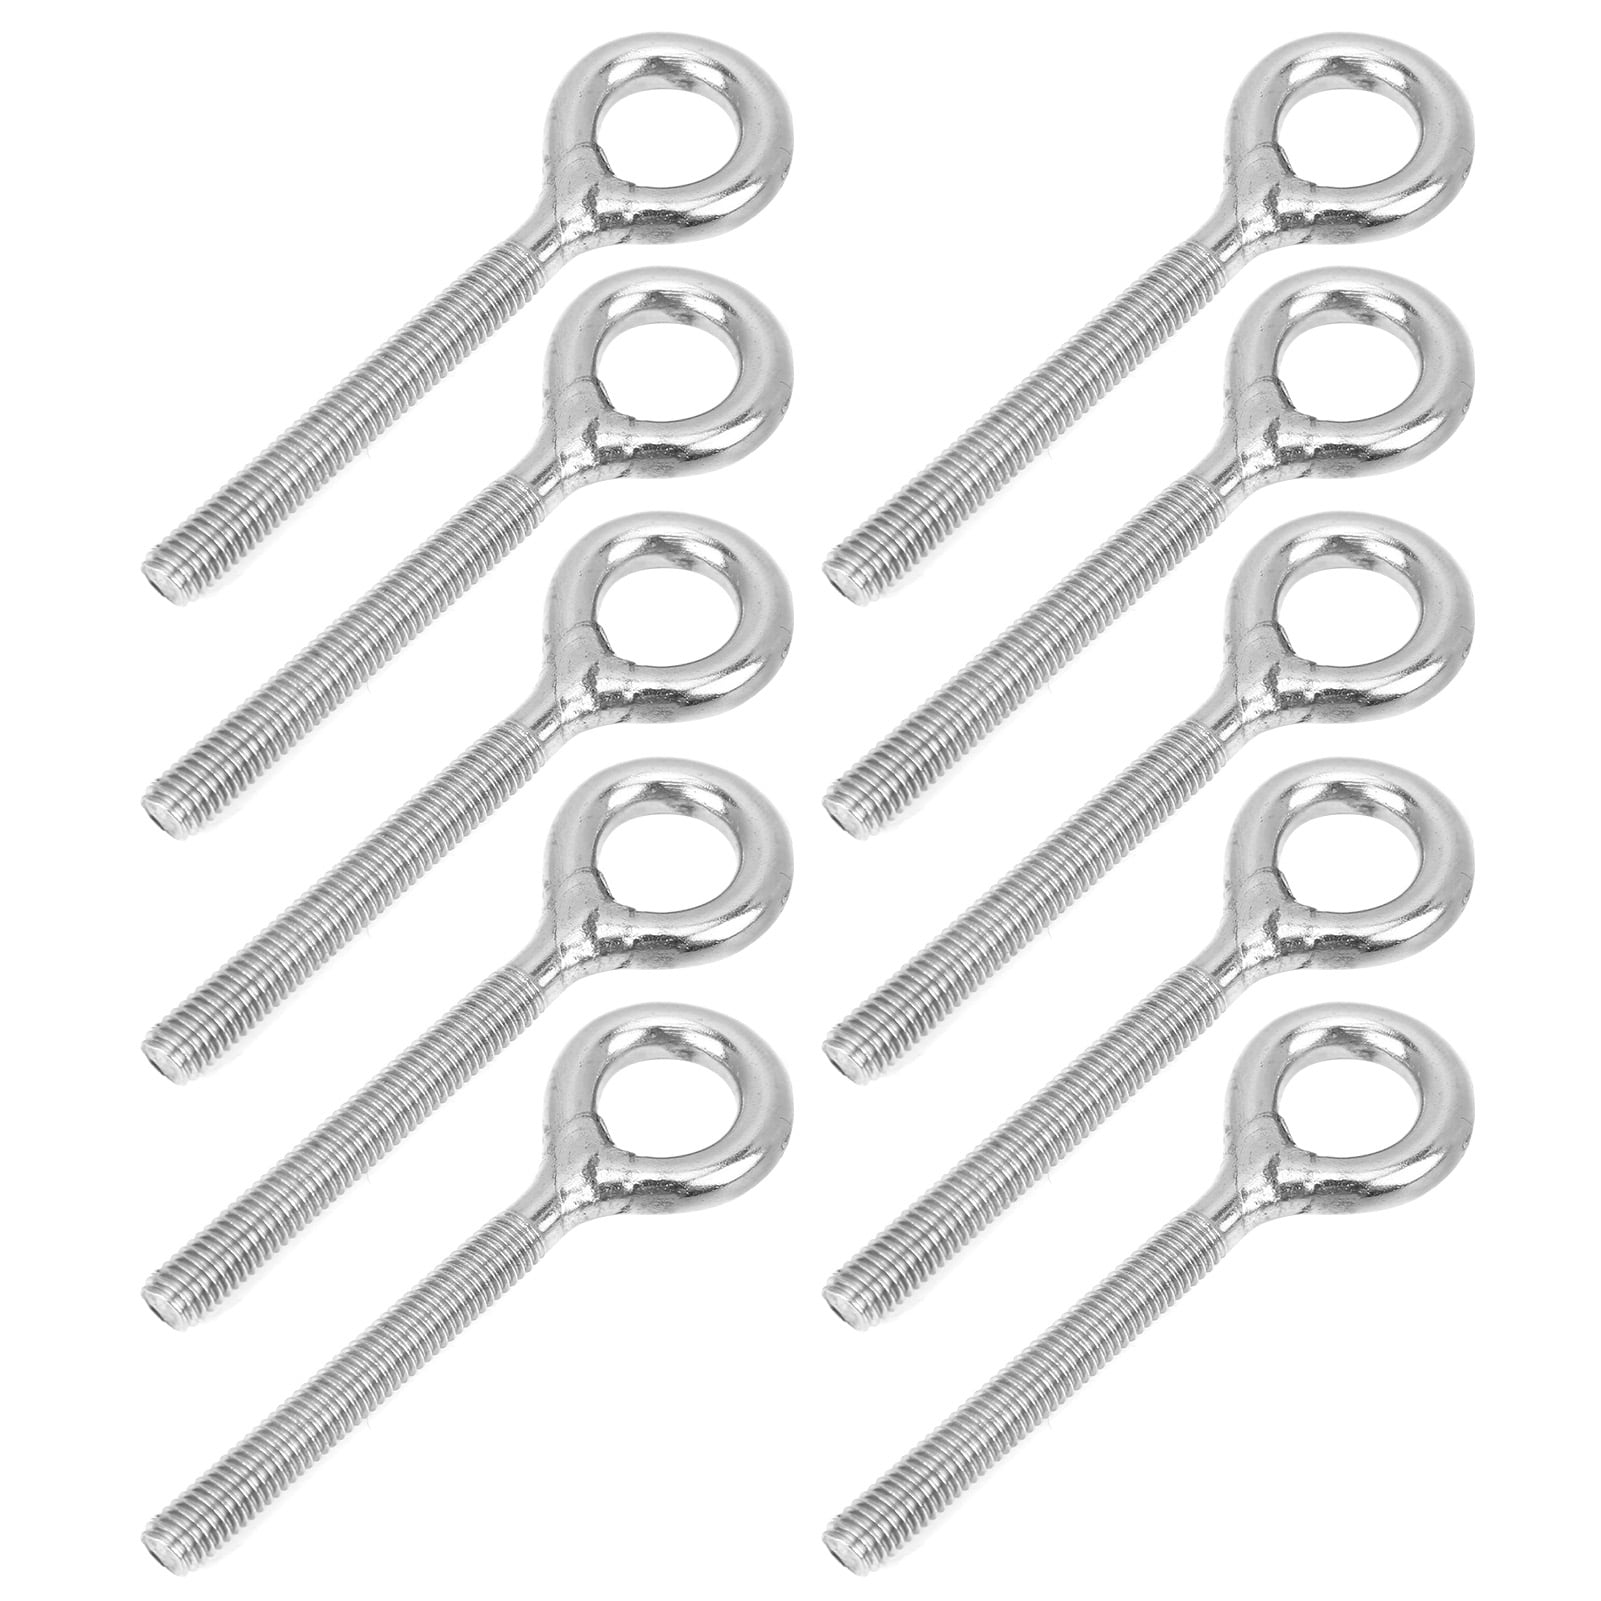 8 Piece 6mm Closed Hook Bolts Secure Professional Solid Surface Tool Workshop 